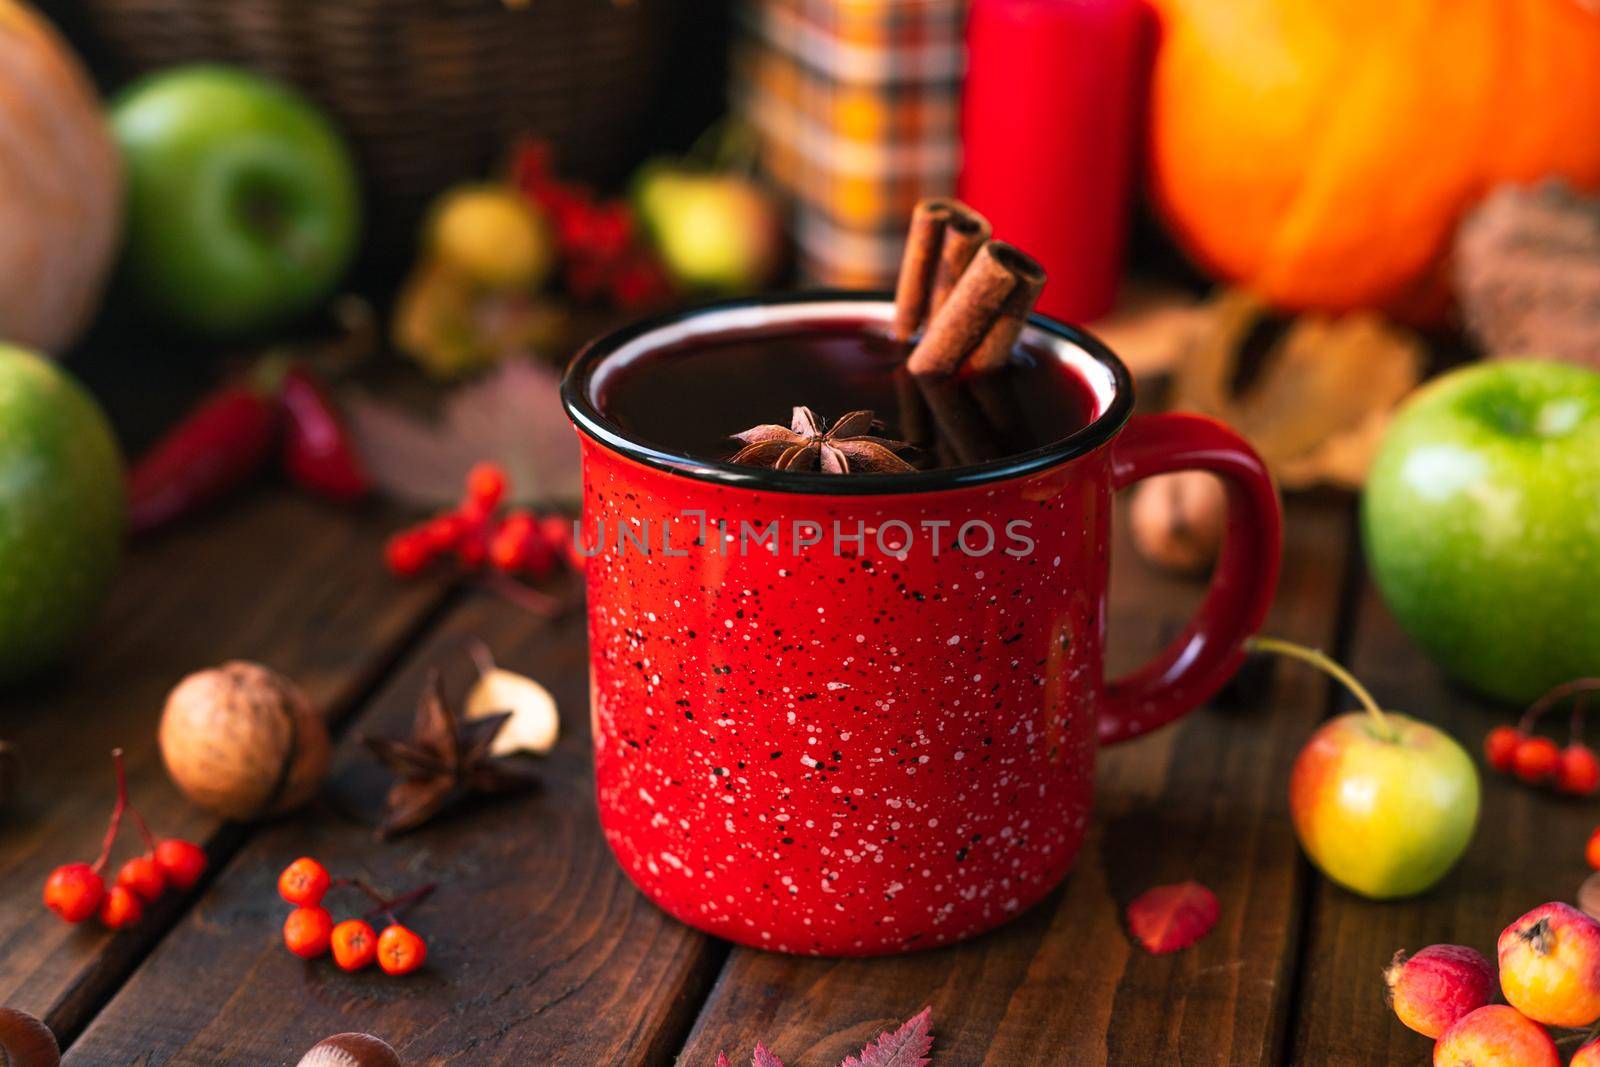 red mug with mulled wine. Cinnamon sticks stick out of the cup and a star of star anise floats. Fruits and spices are all around on a wooden table by Adriablack